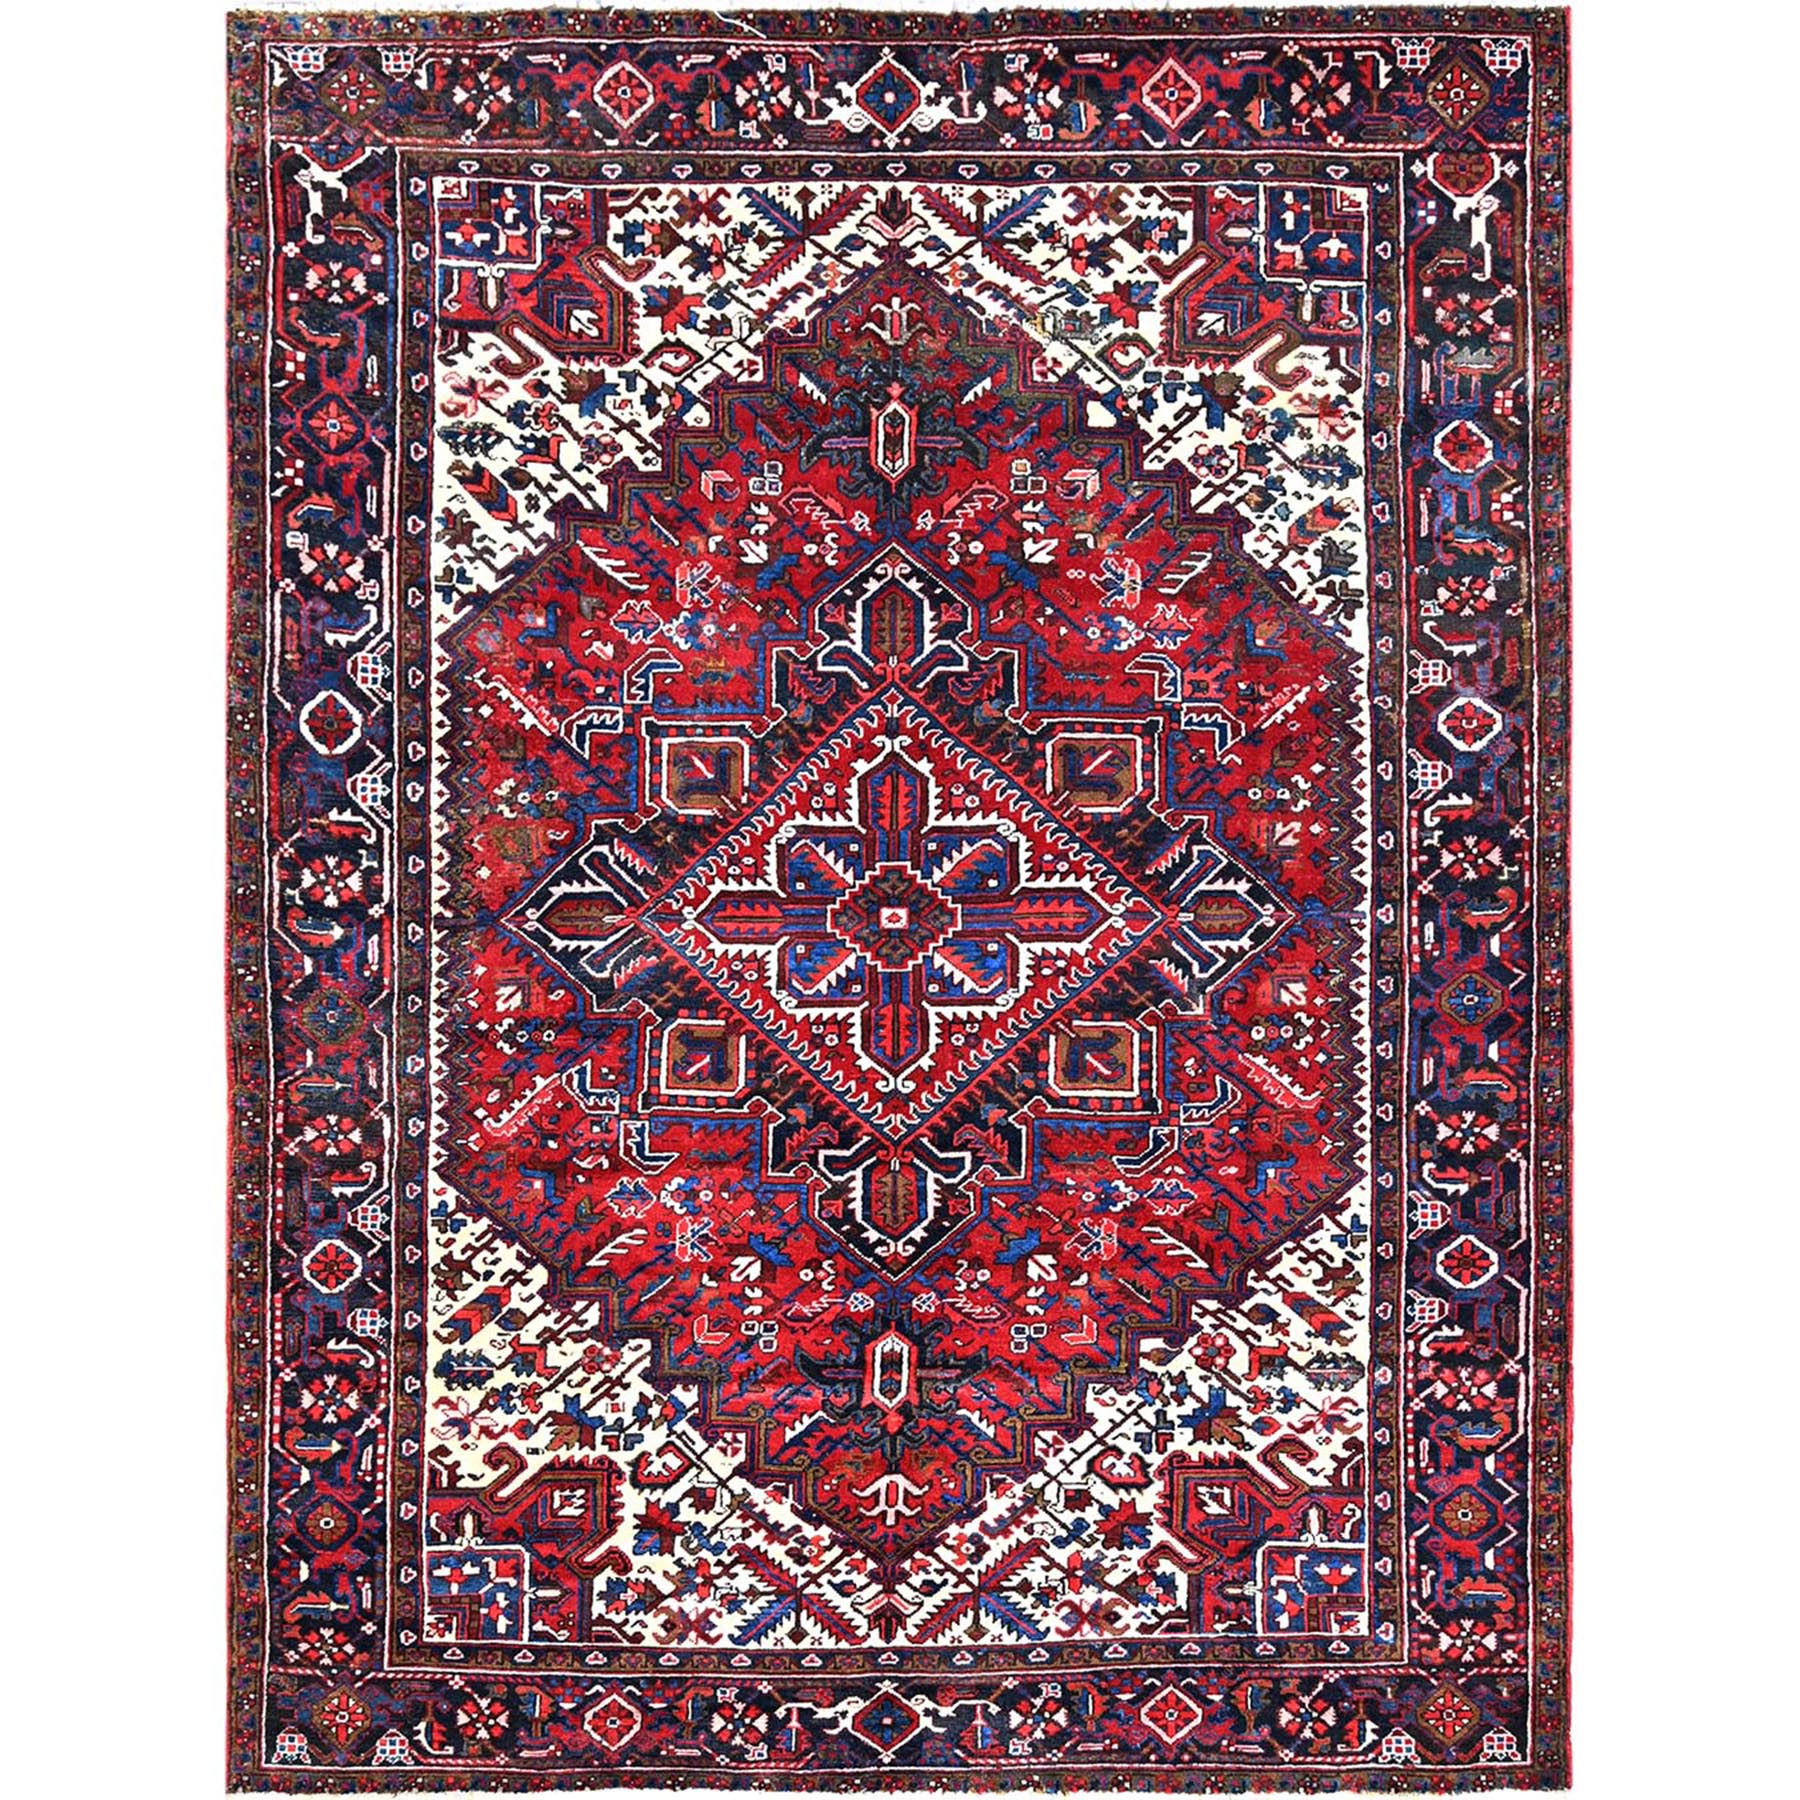  Wool Hand-Knotted Area Rug 7'2